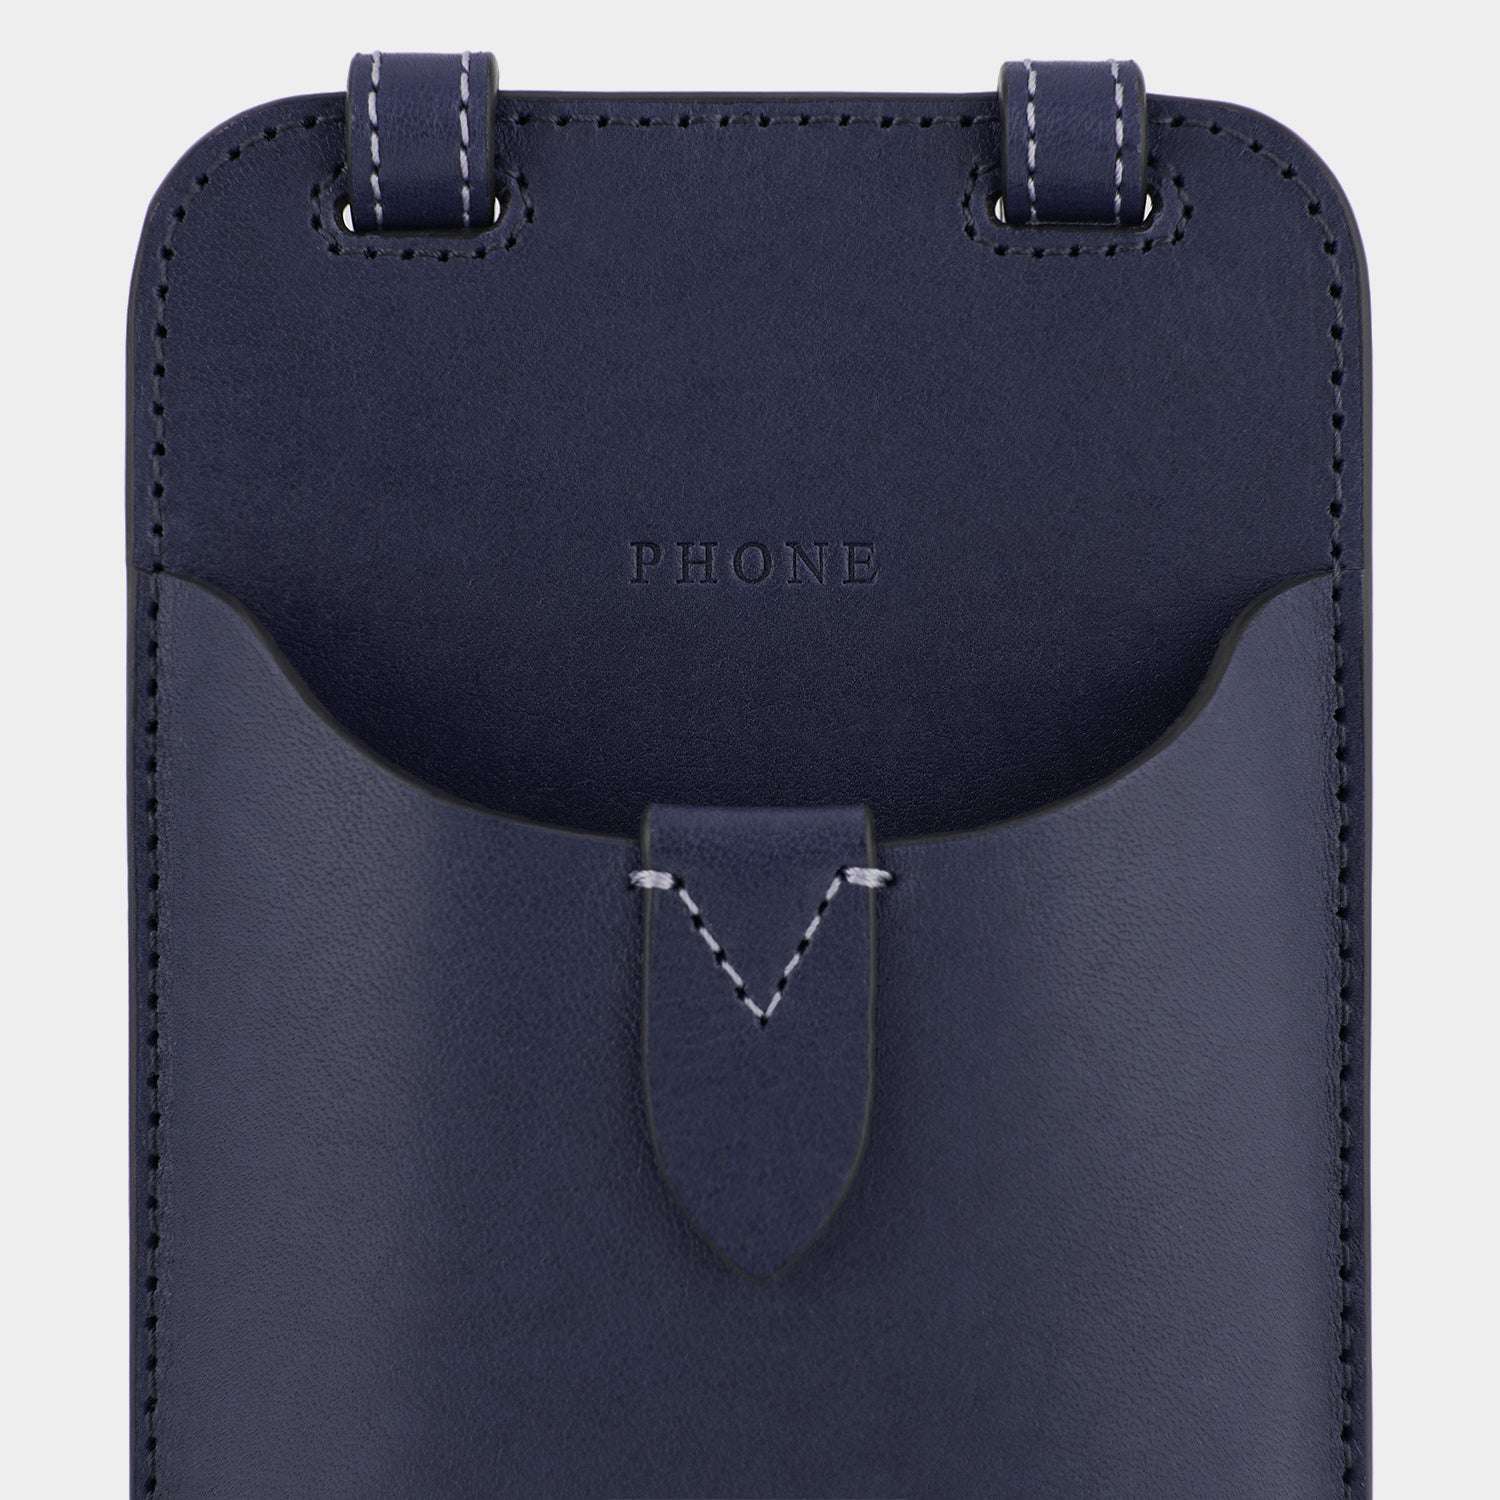 Return to Nature Phone Pouch on Strap -

                  
                    Compostable Leather in Marine -
                  

                  Anya Hindmarch UK
